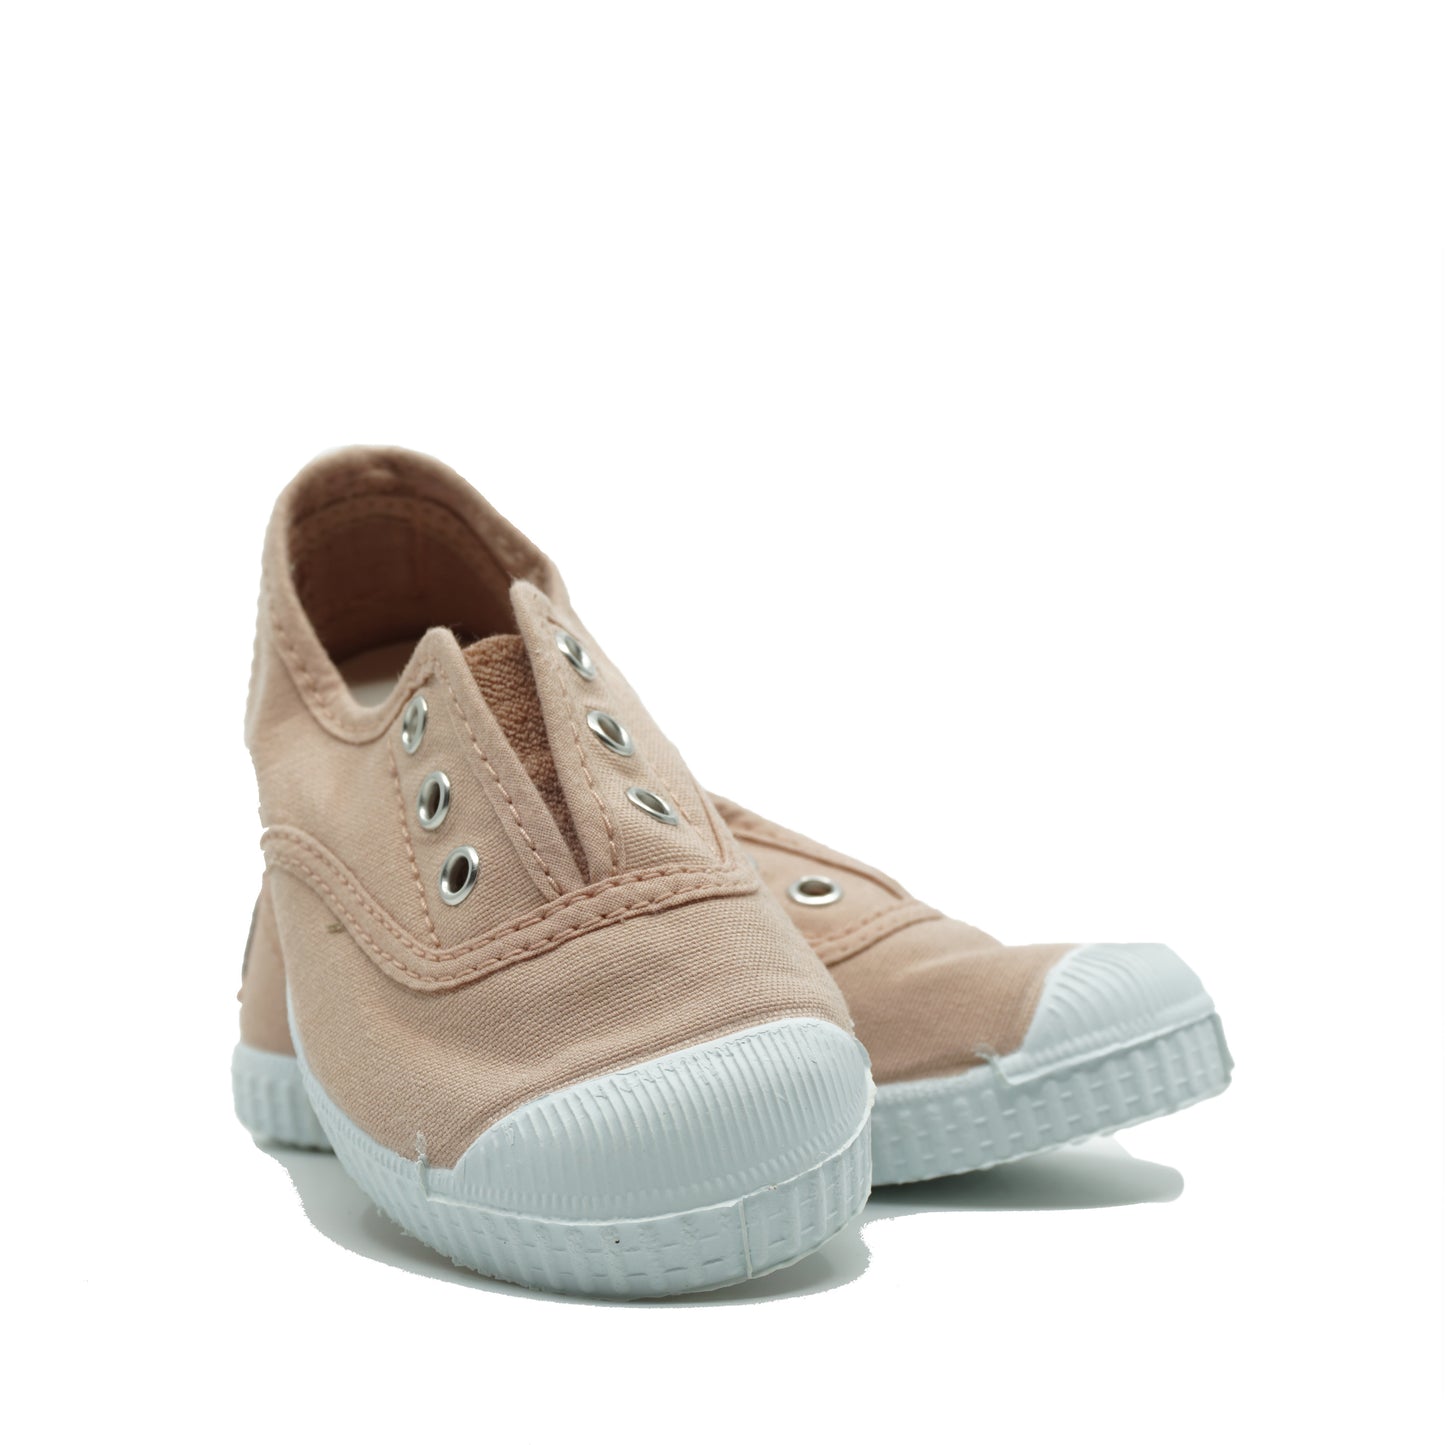 Chaussures Cienta Play Rose Poudré (22-34)